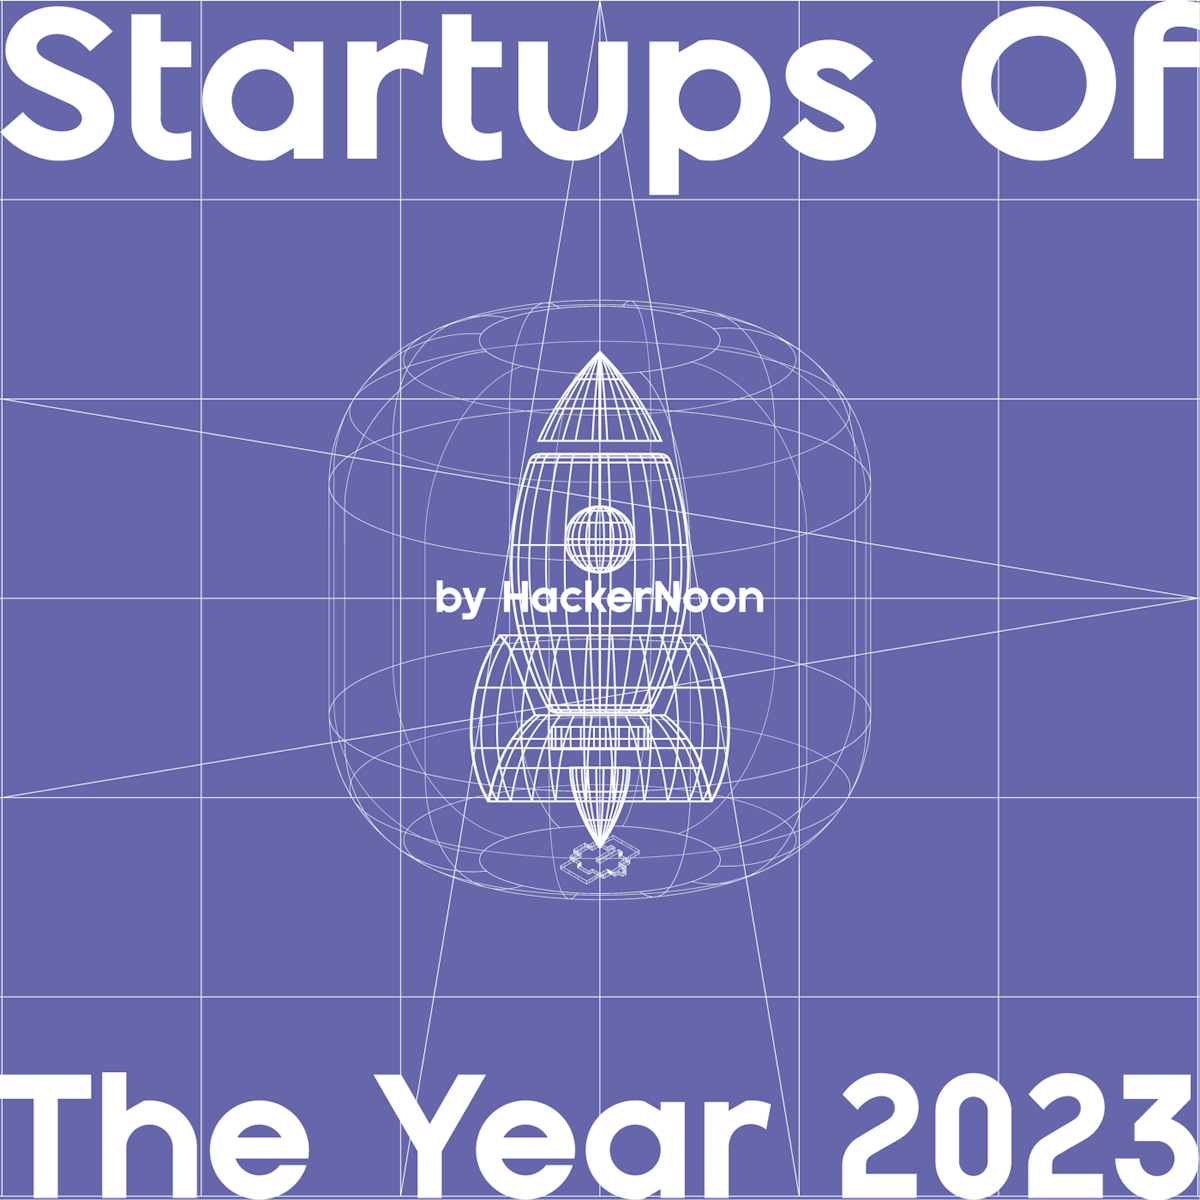 featured image - Startups of the Year 2023: General Startup Interview